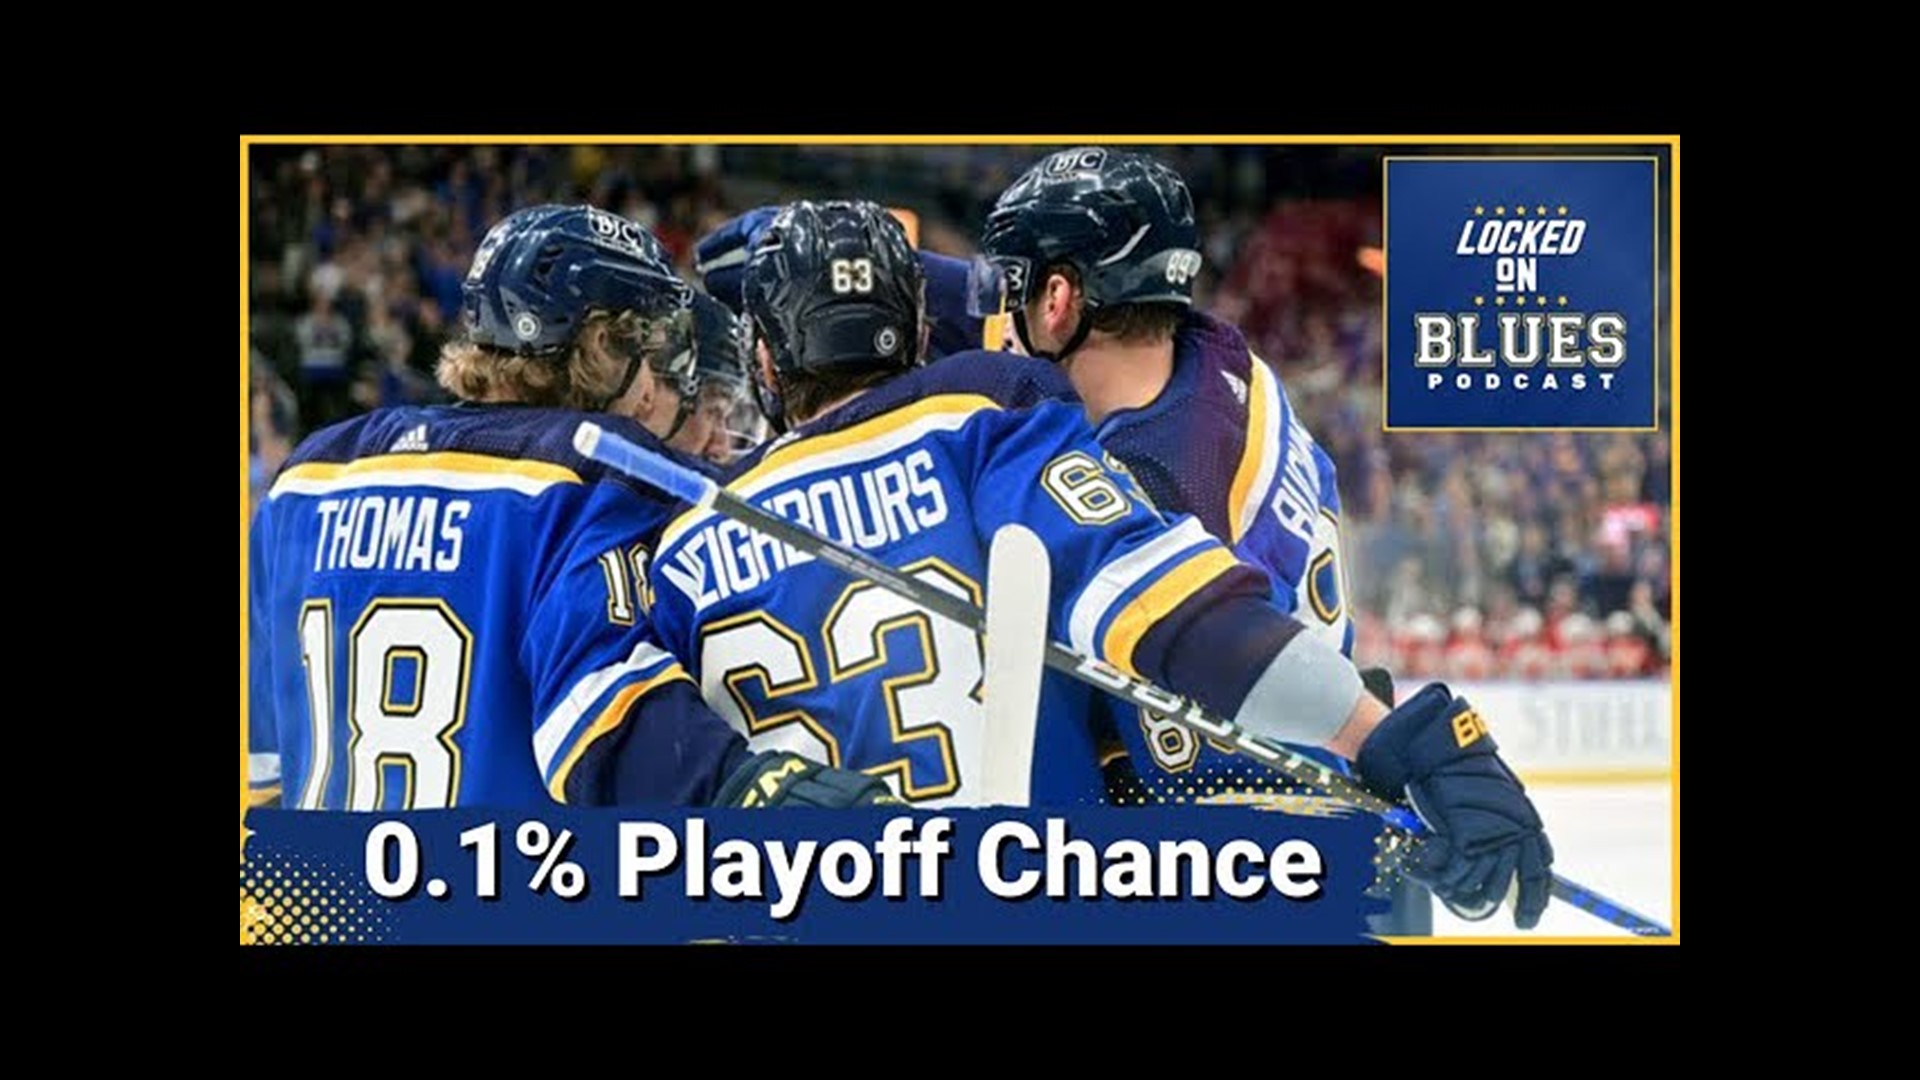 So You're Telling Me There's A Chance???